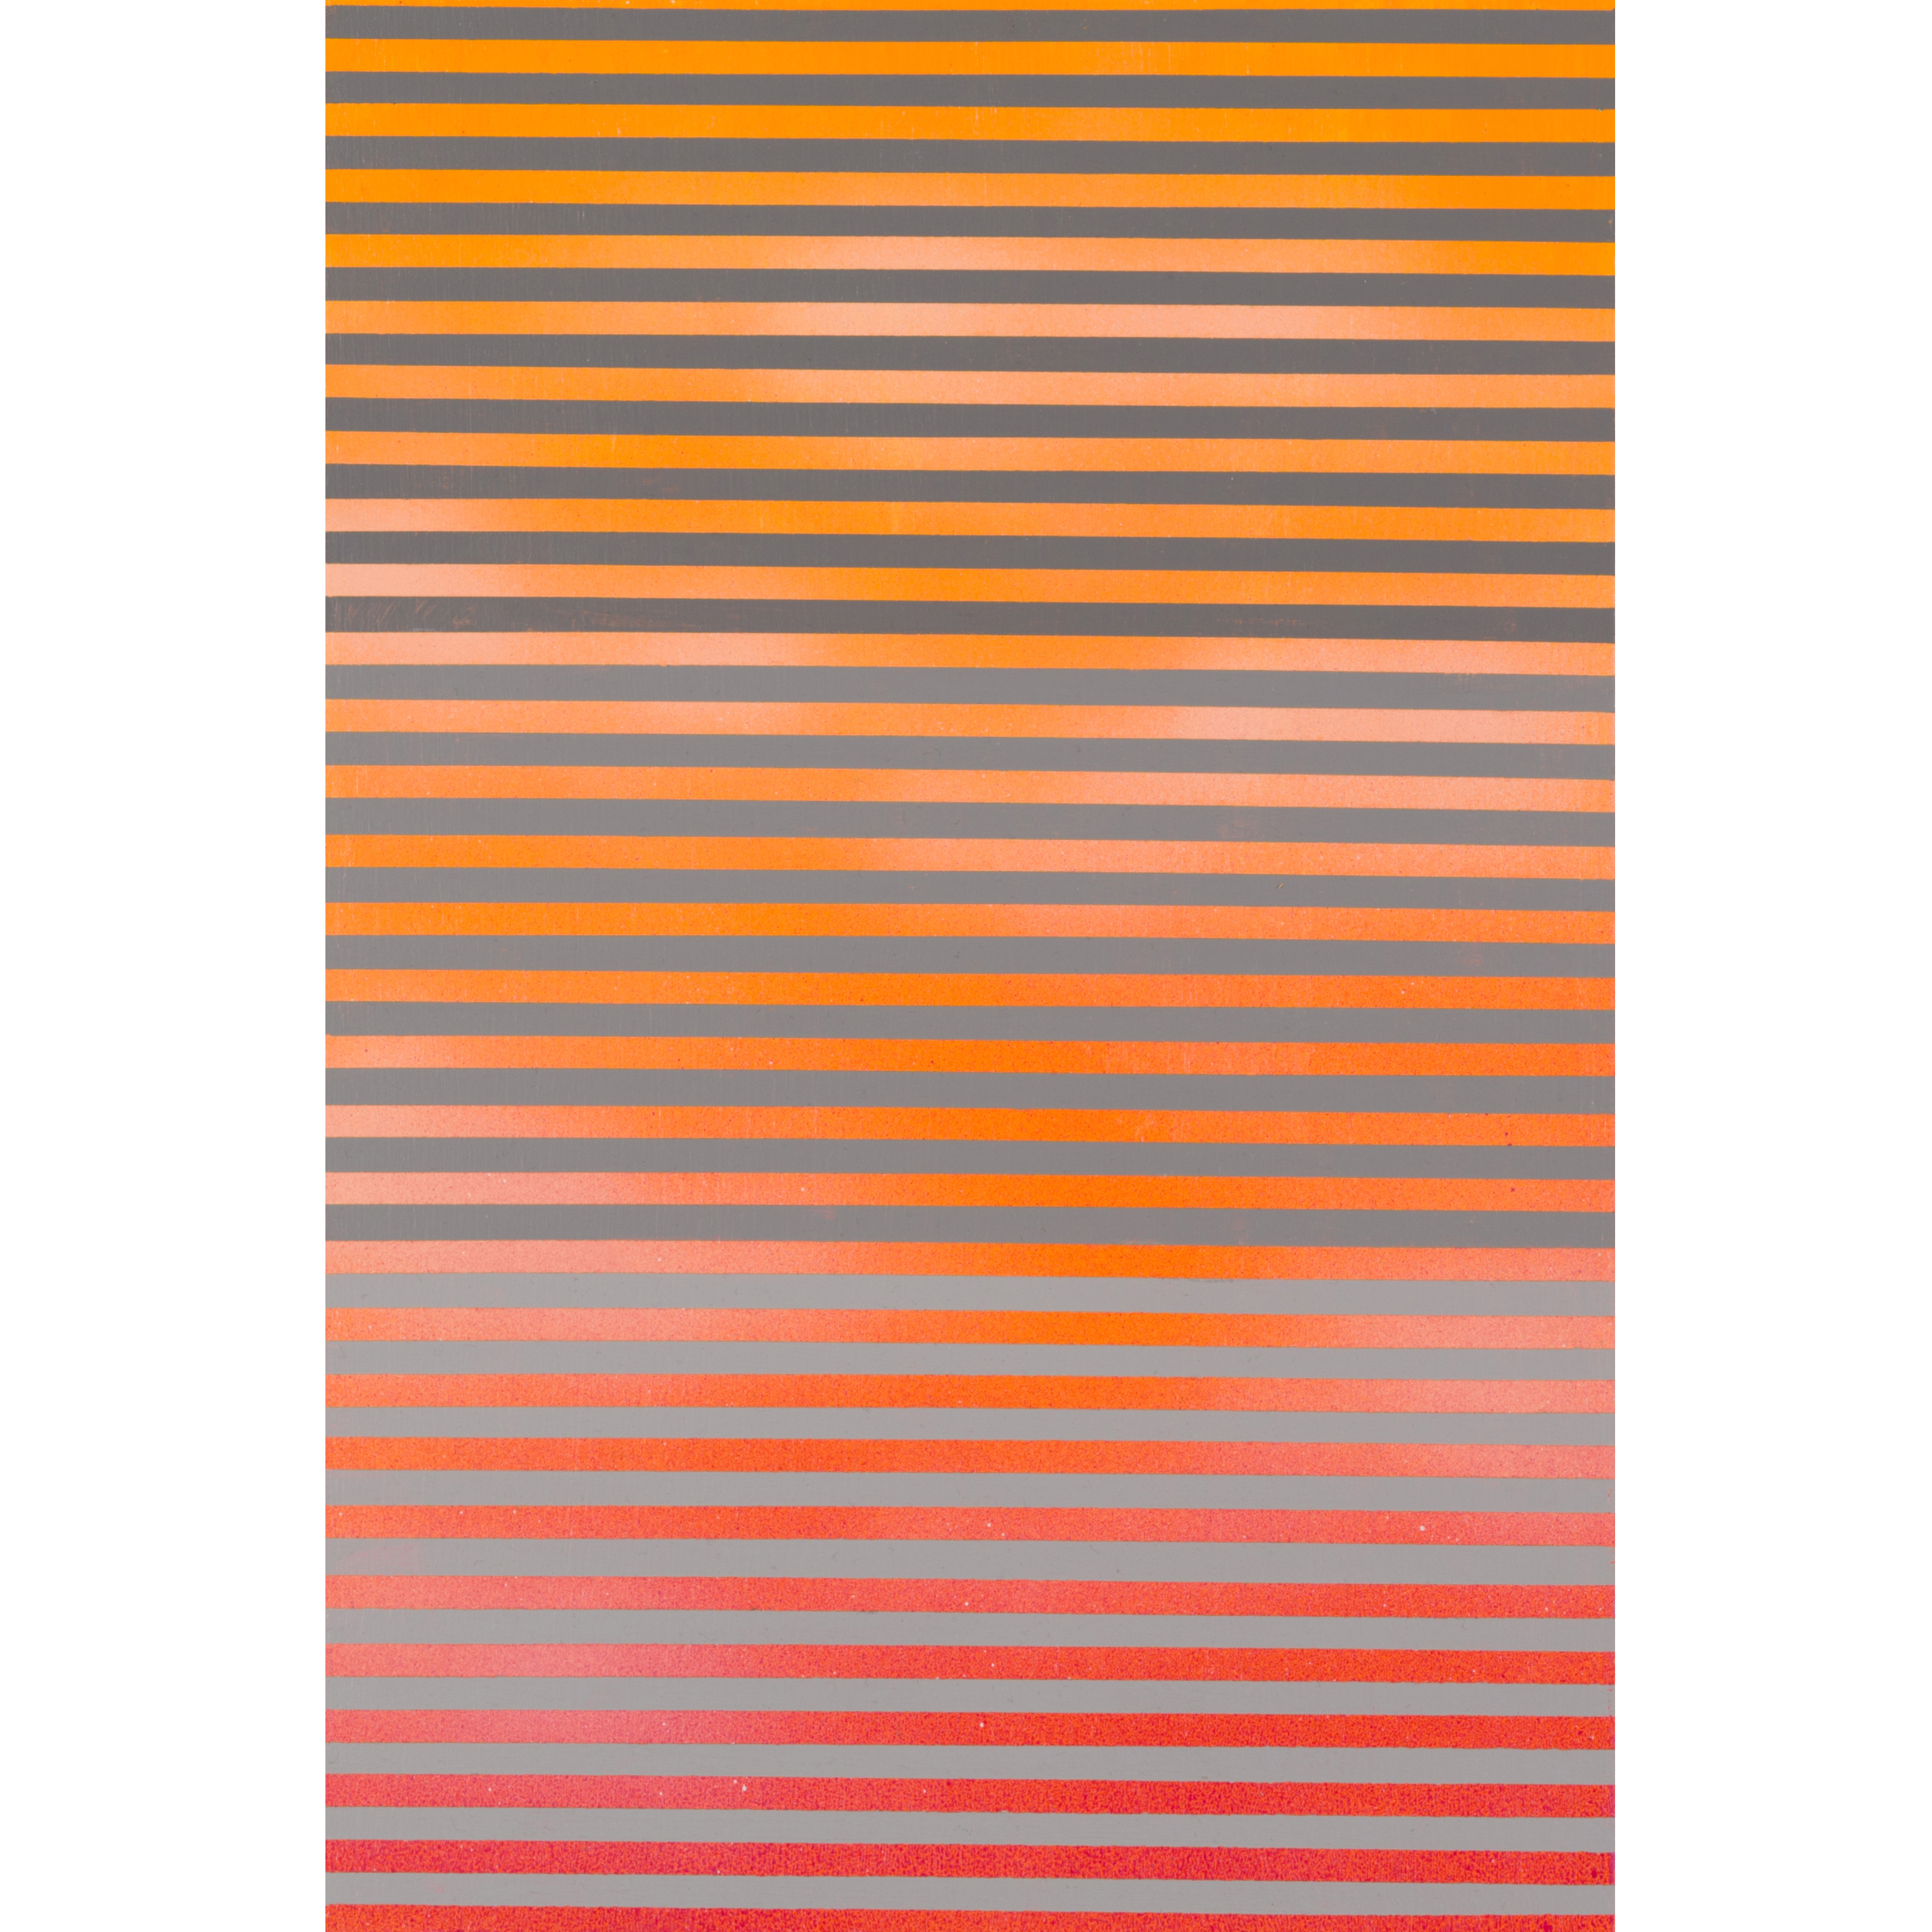   Orange Sky , Acrylic on Hand Cut Sheetrock, 15 x 10 inches, 2014. Private Collection. 